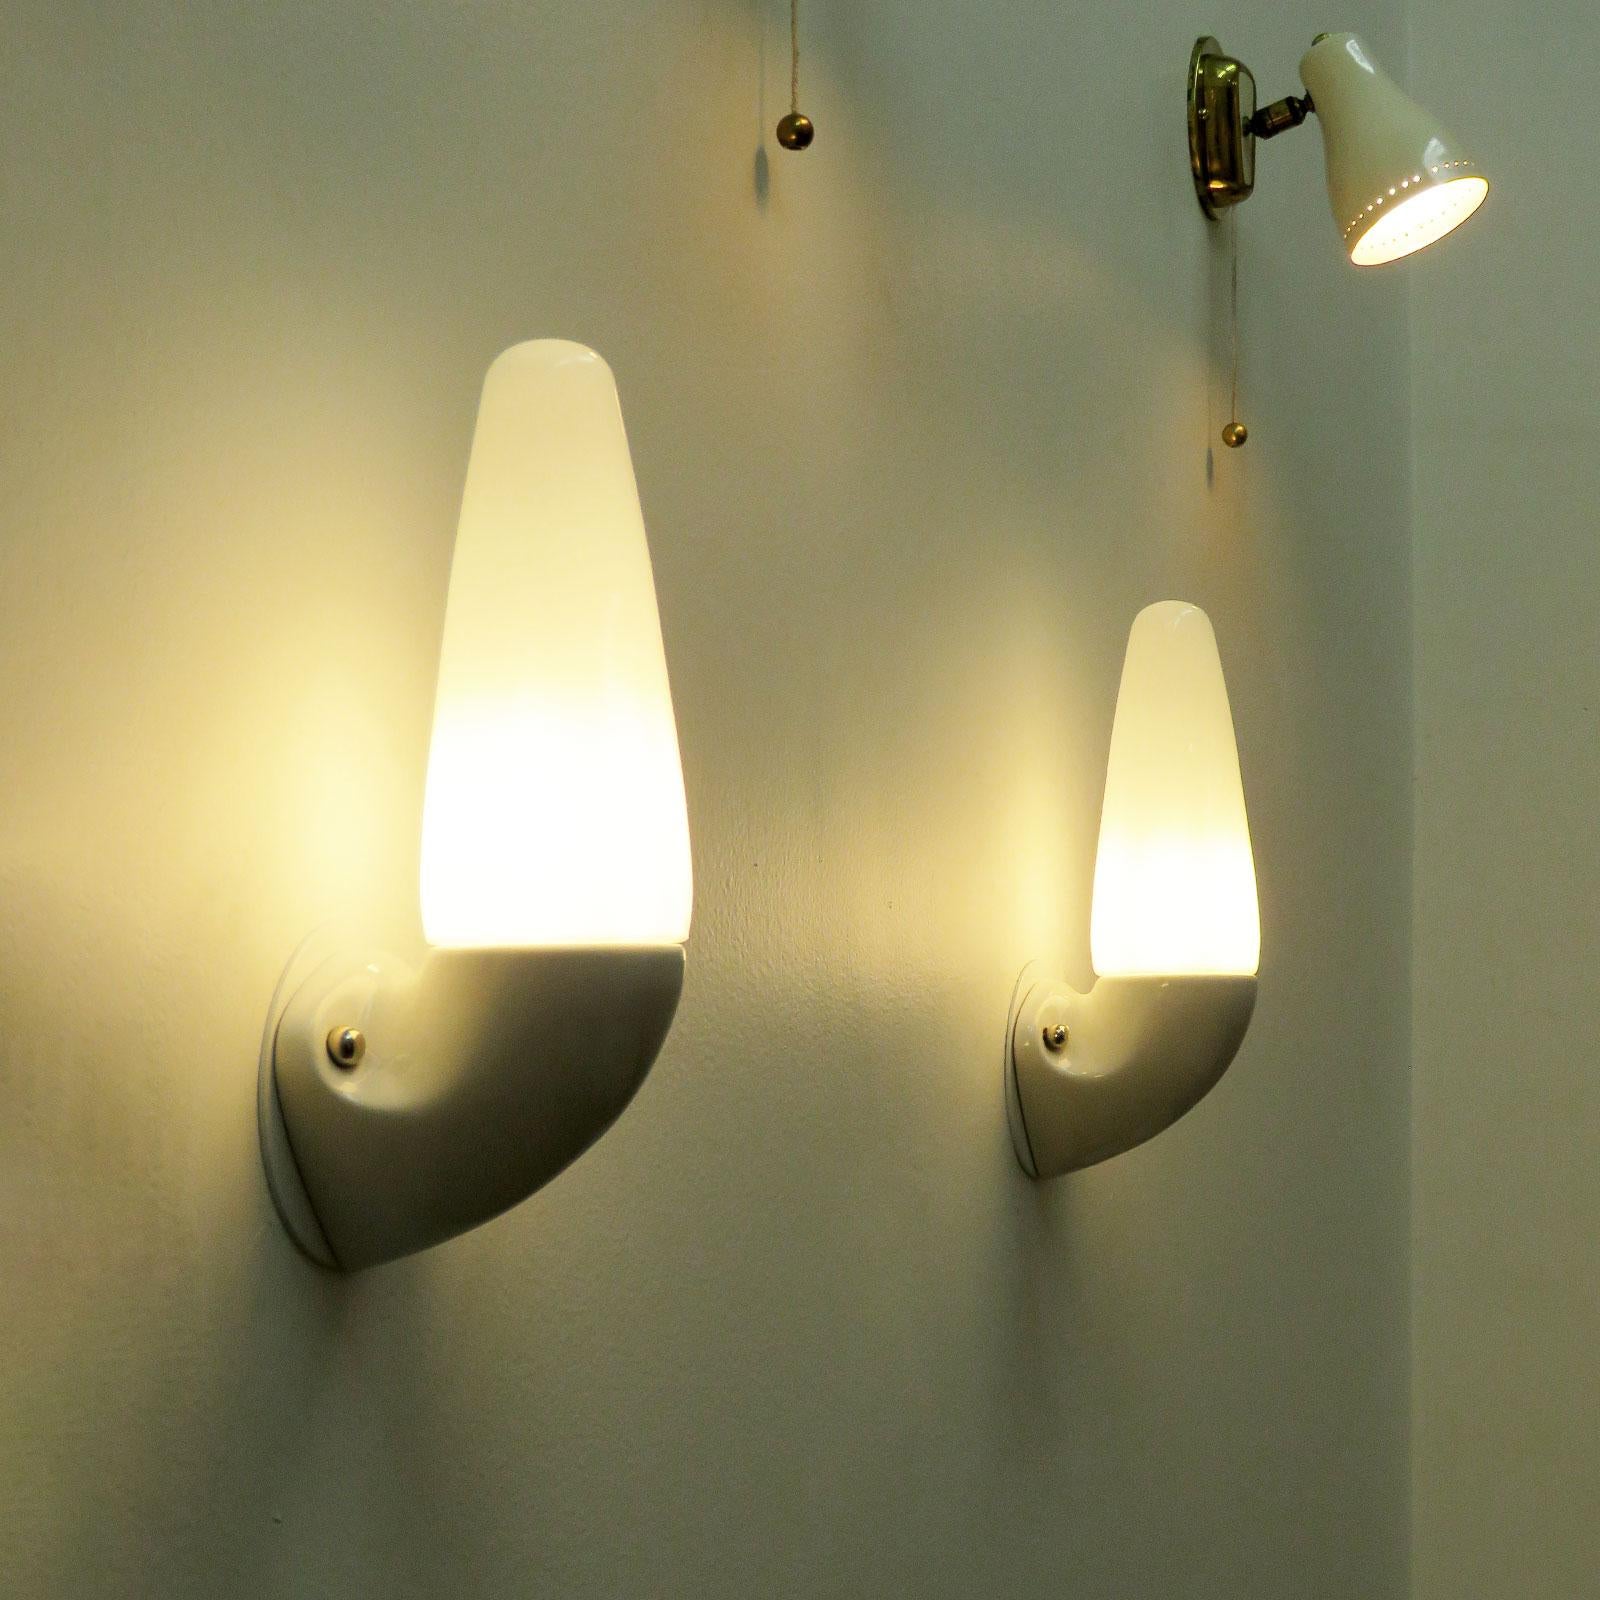 Pair of Ceramic Wall Lights by Sigvard Bernadotte For Sale 4